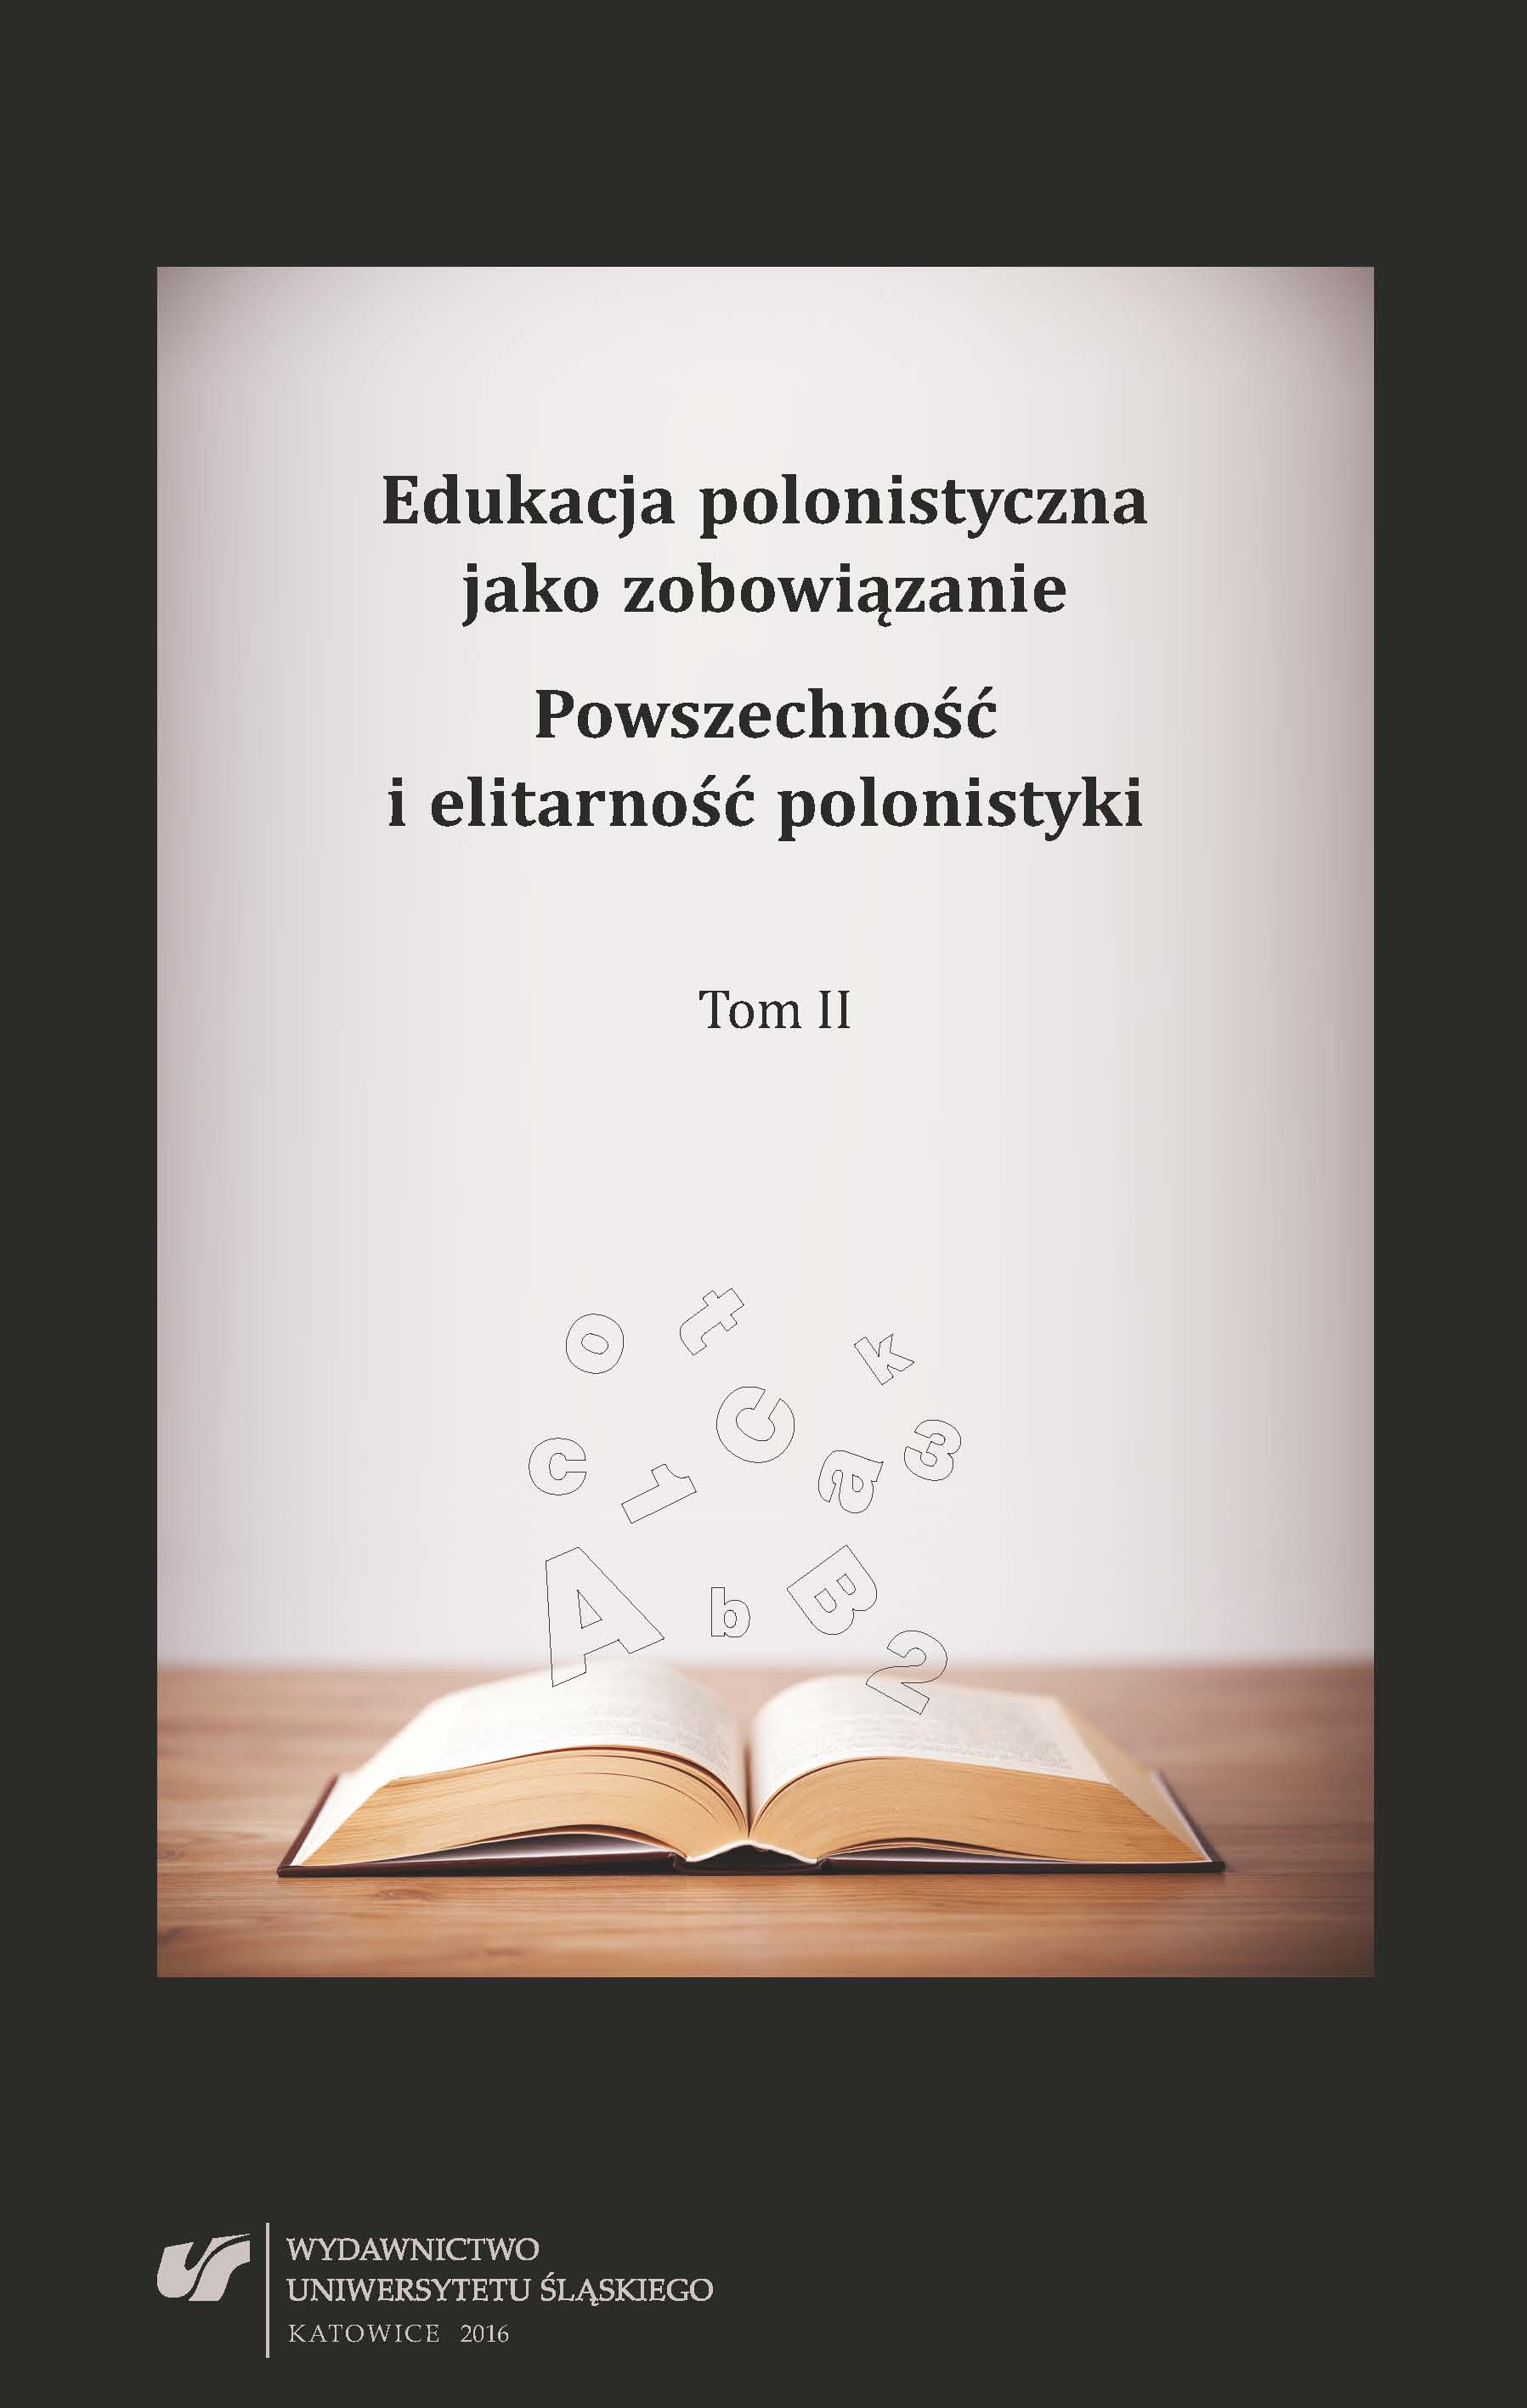 Polish language education as a commitment. The universality and elitism of Polish studies. Vol. 2